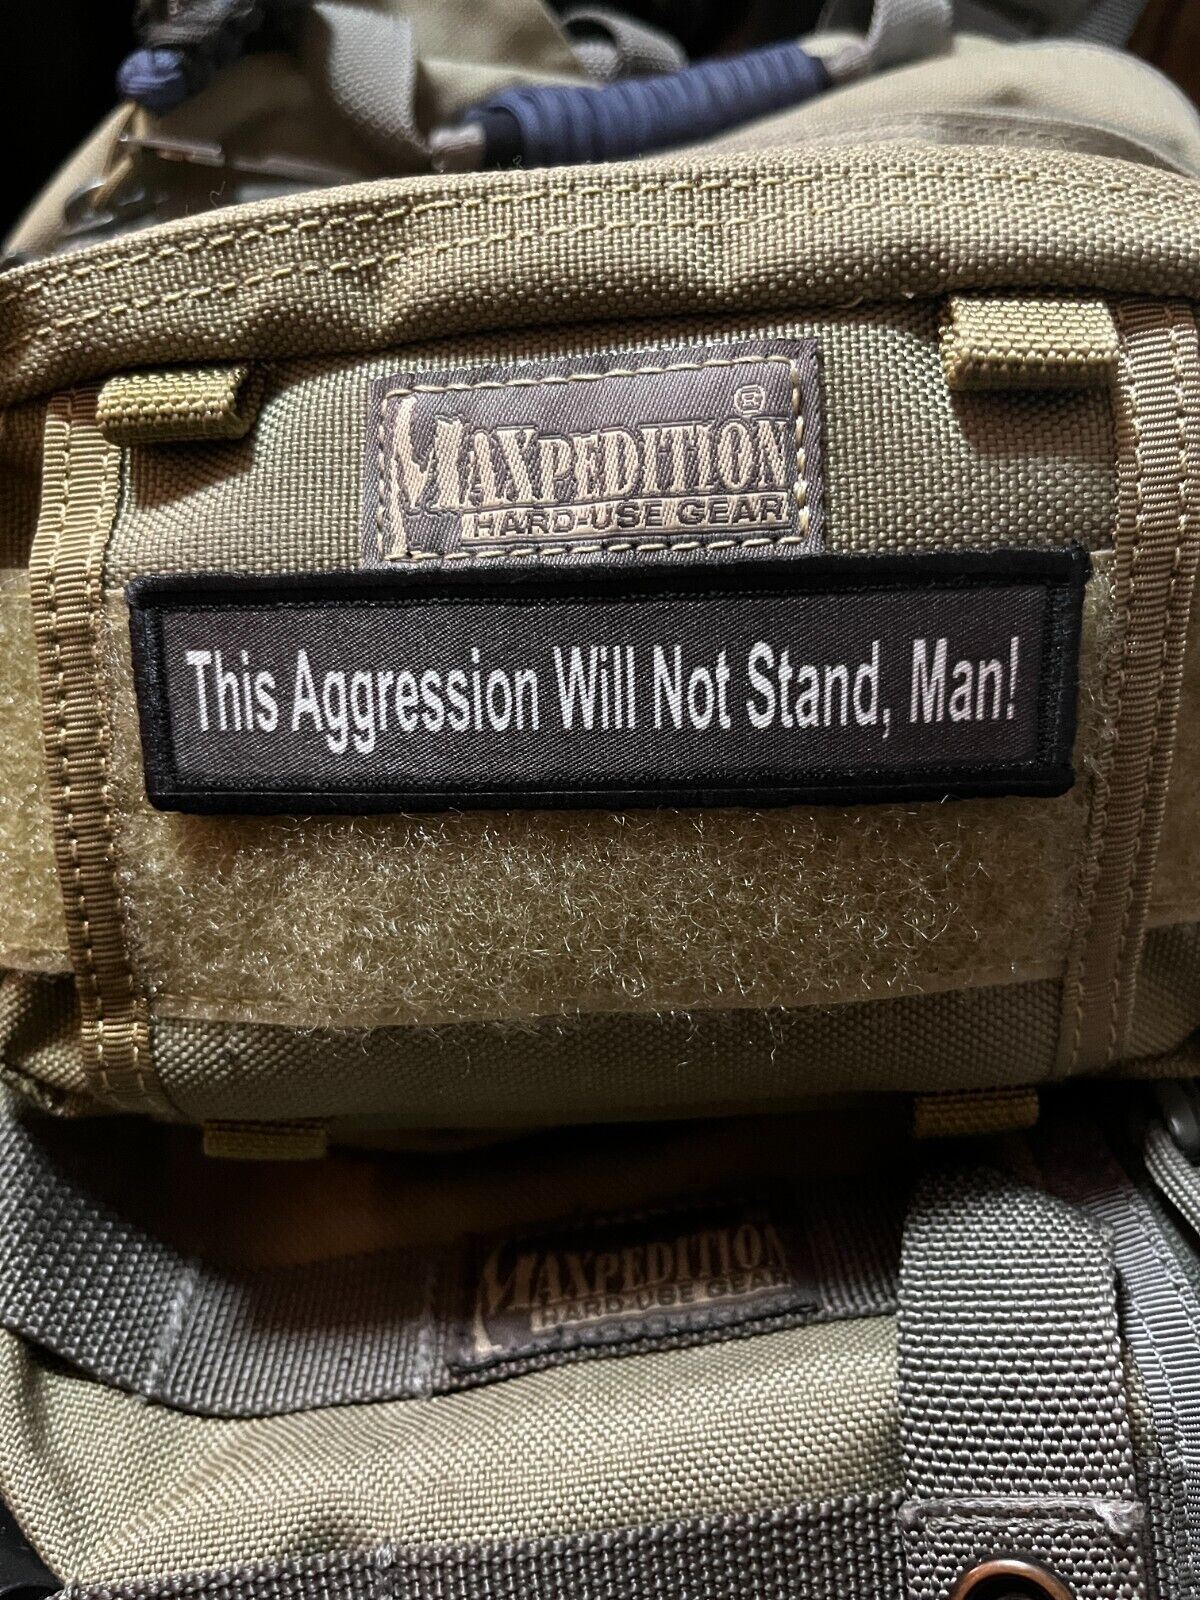 1x4 Lebowski This Aggression Will Not Stand, Man Morale Patch Tactical ARMY